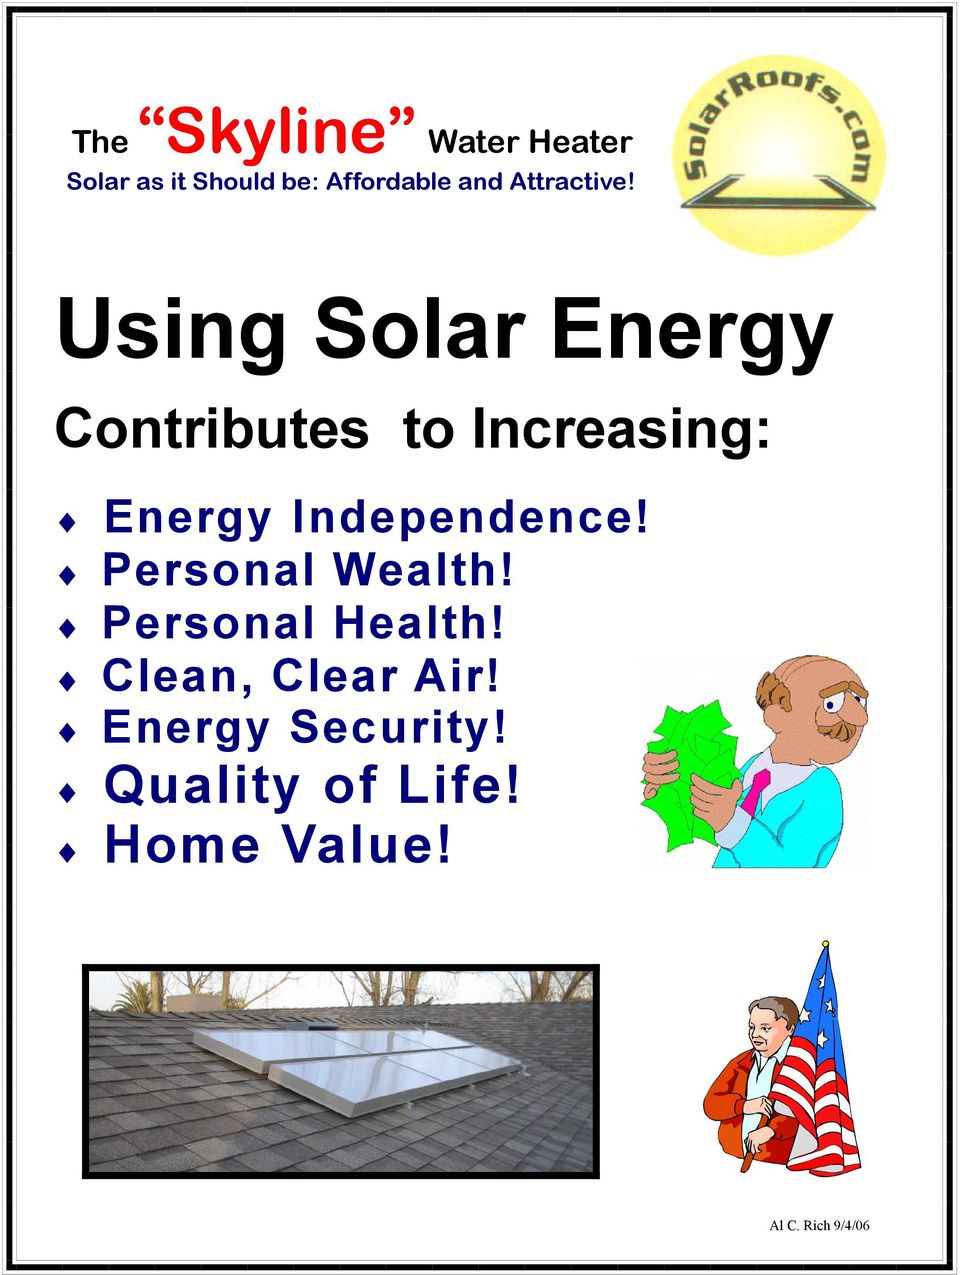 Using Solar Energy Contributes to Increasing: Energy Independence!